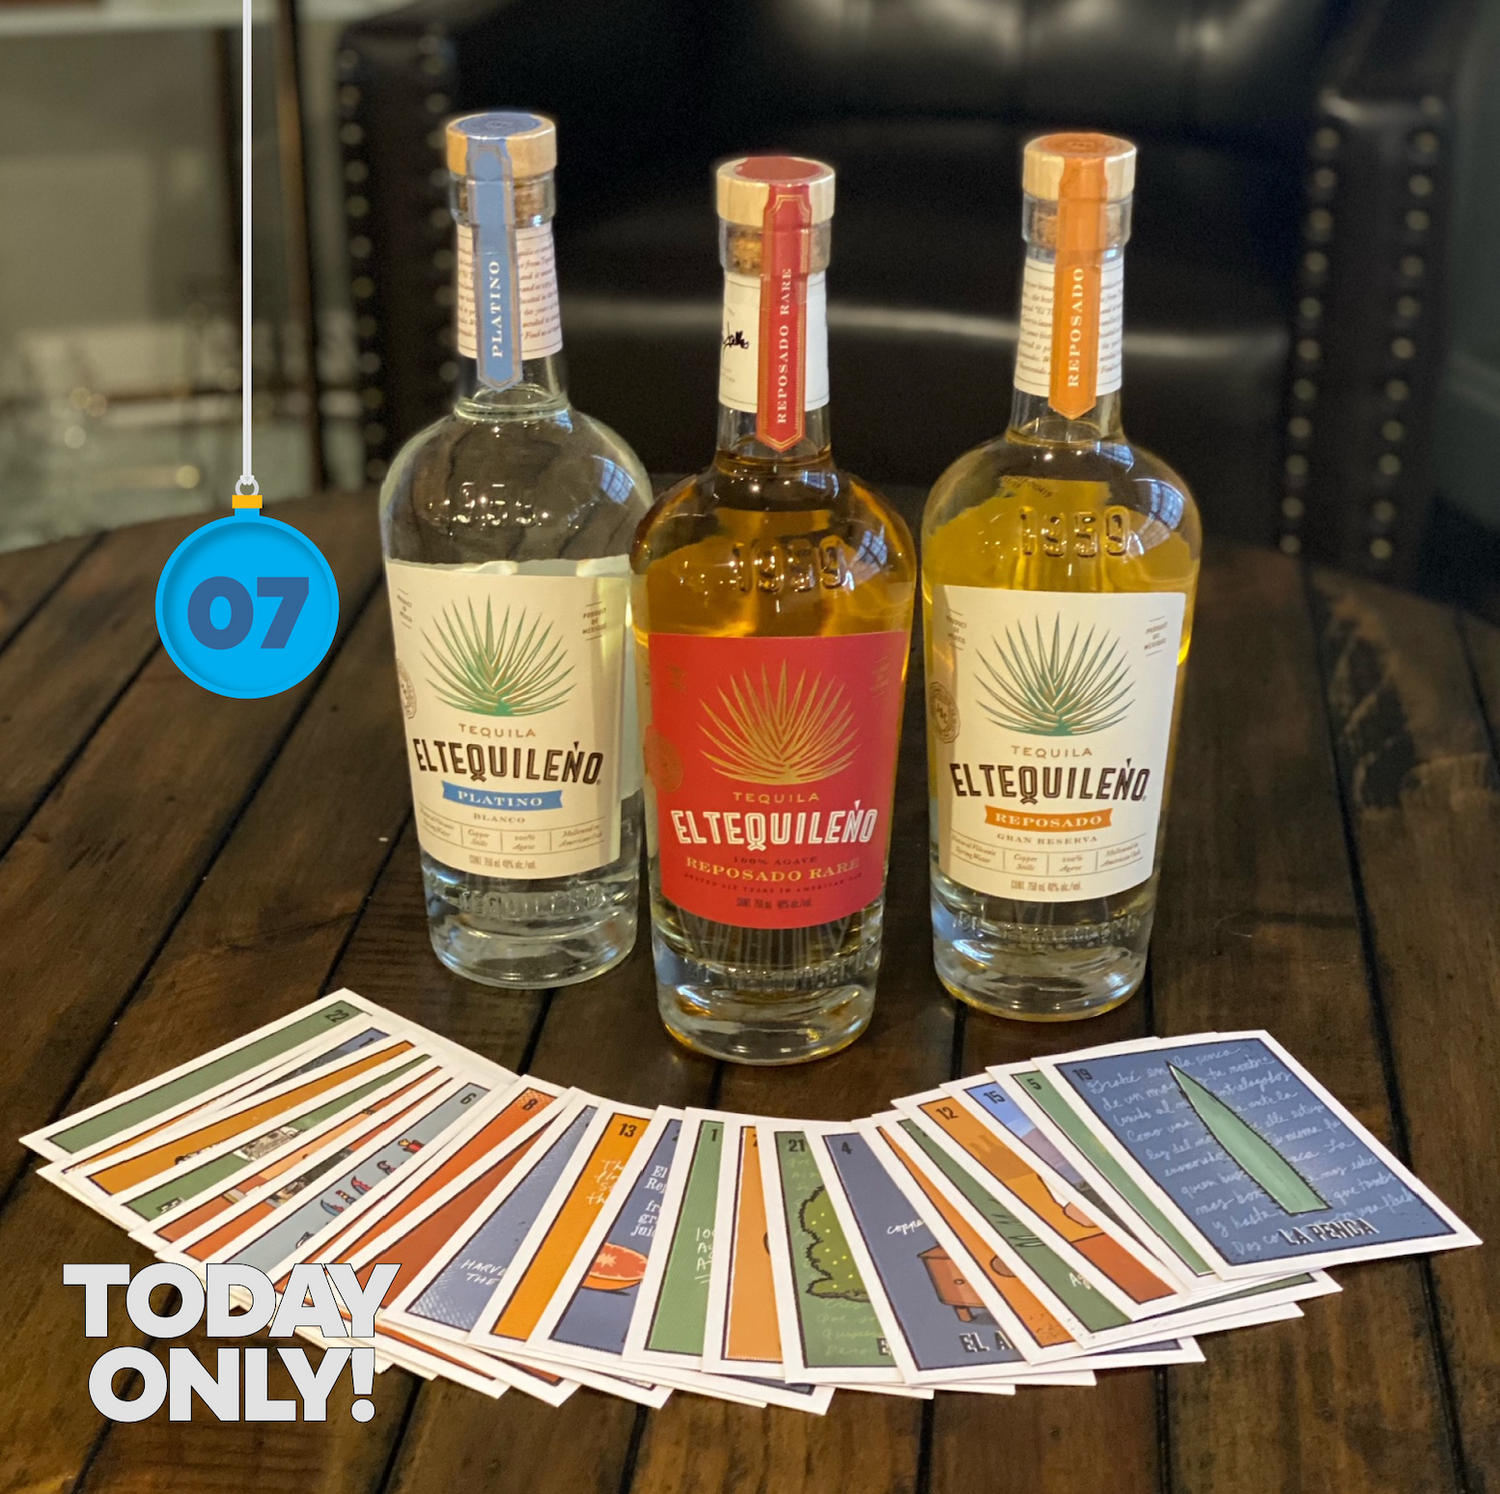 EXPIRED: Purchase any 2 bottles of El Tequileño Tequila and get Loteria card game, FREE